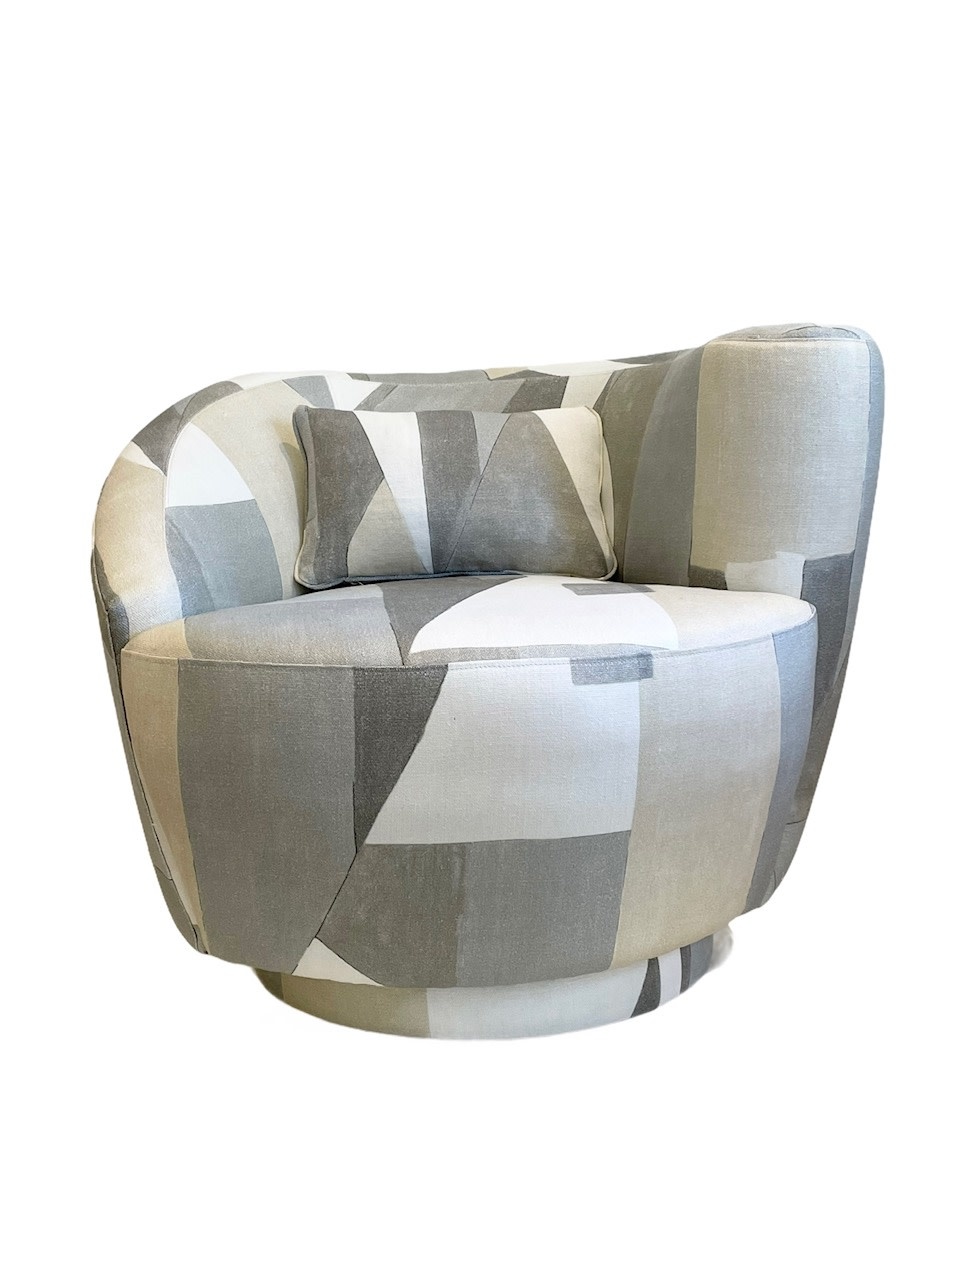 Becker Minty - Bolster Cushion in Kelly Wearstler District Fabric Shown in Alabaster - 30x25cm-2